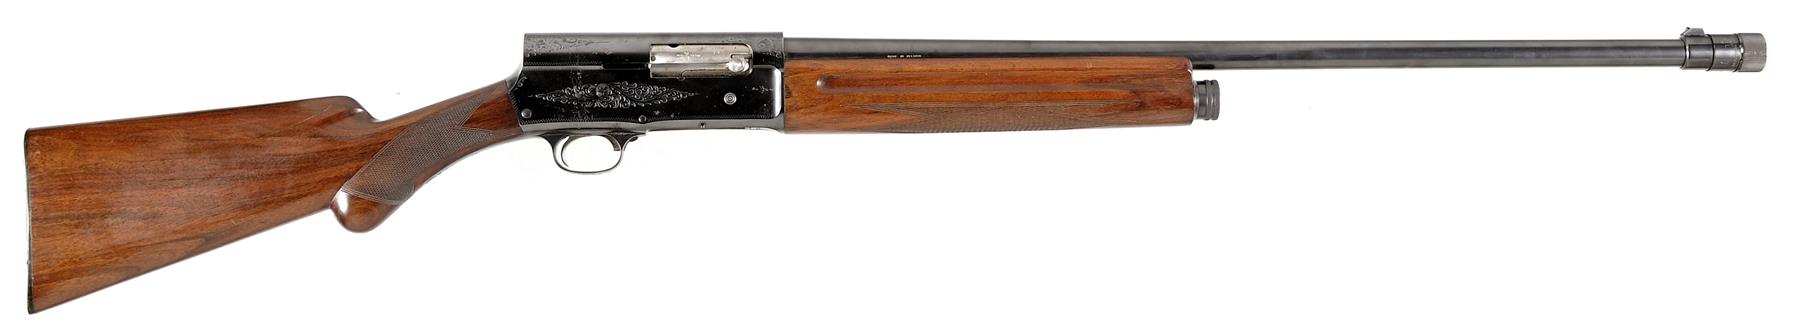 Belgian FN made 1947 vintage Browning Auto 5 coming up for auction by Rock Island Auction on 26th May 2016. (Picture courtesy Rock Island Auction).